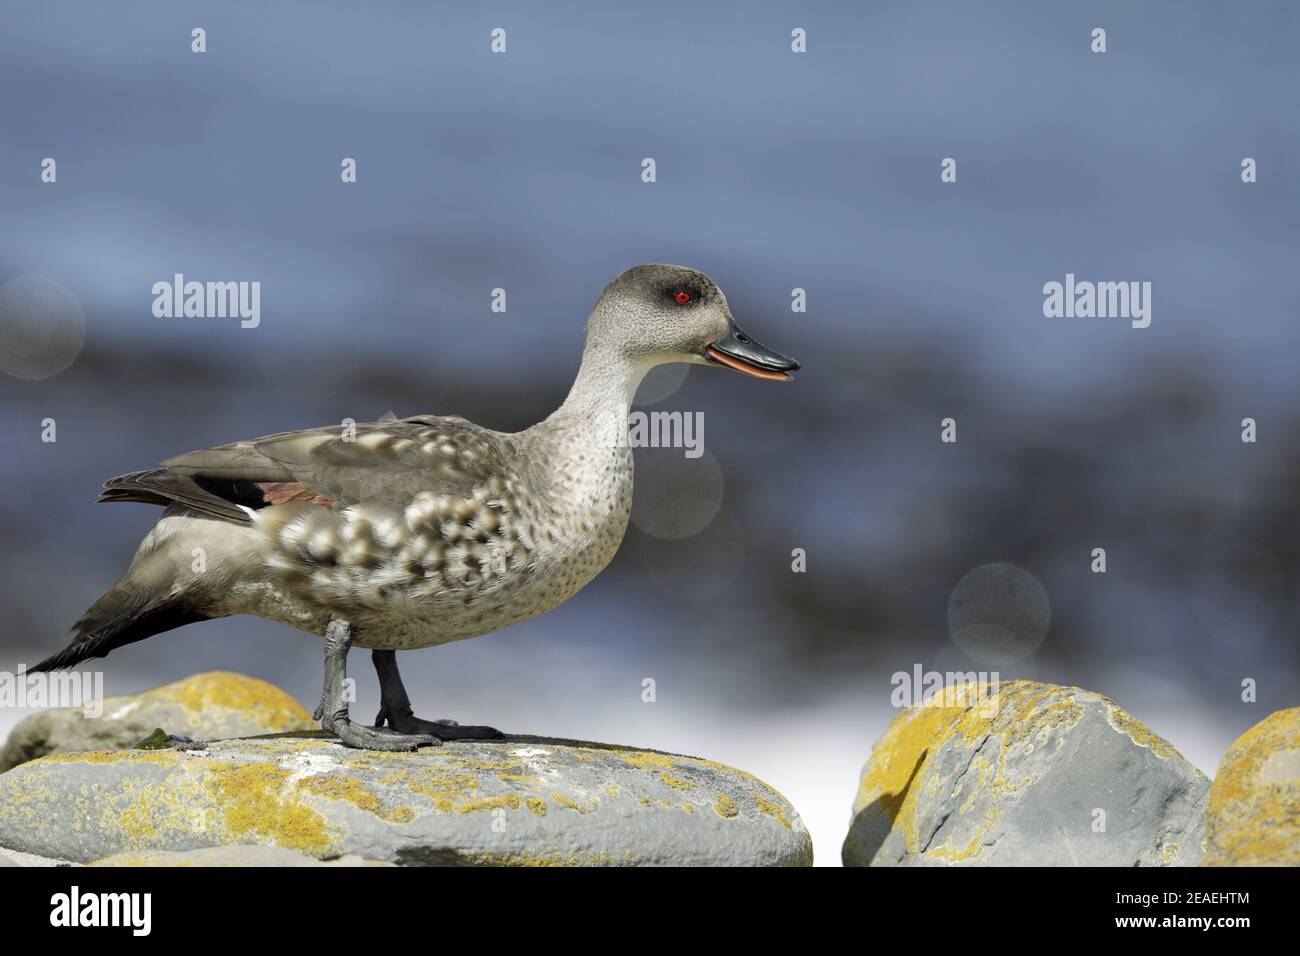 Crested Duck, Lophonetta specularioides, calling Stock Photo